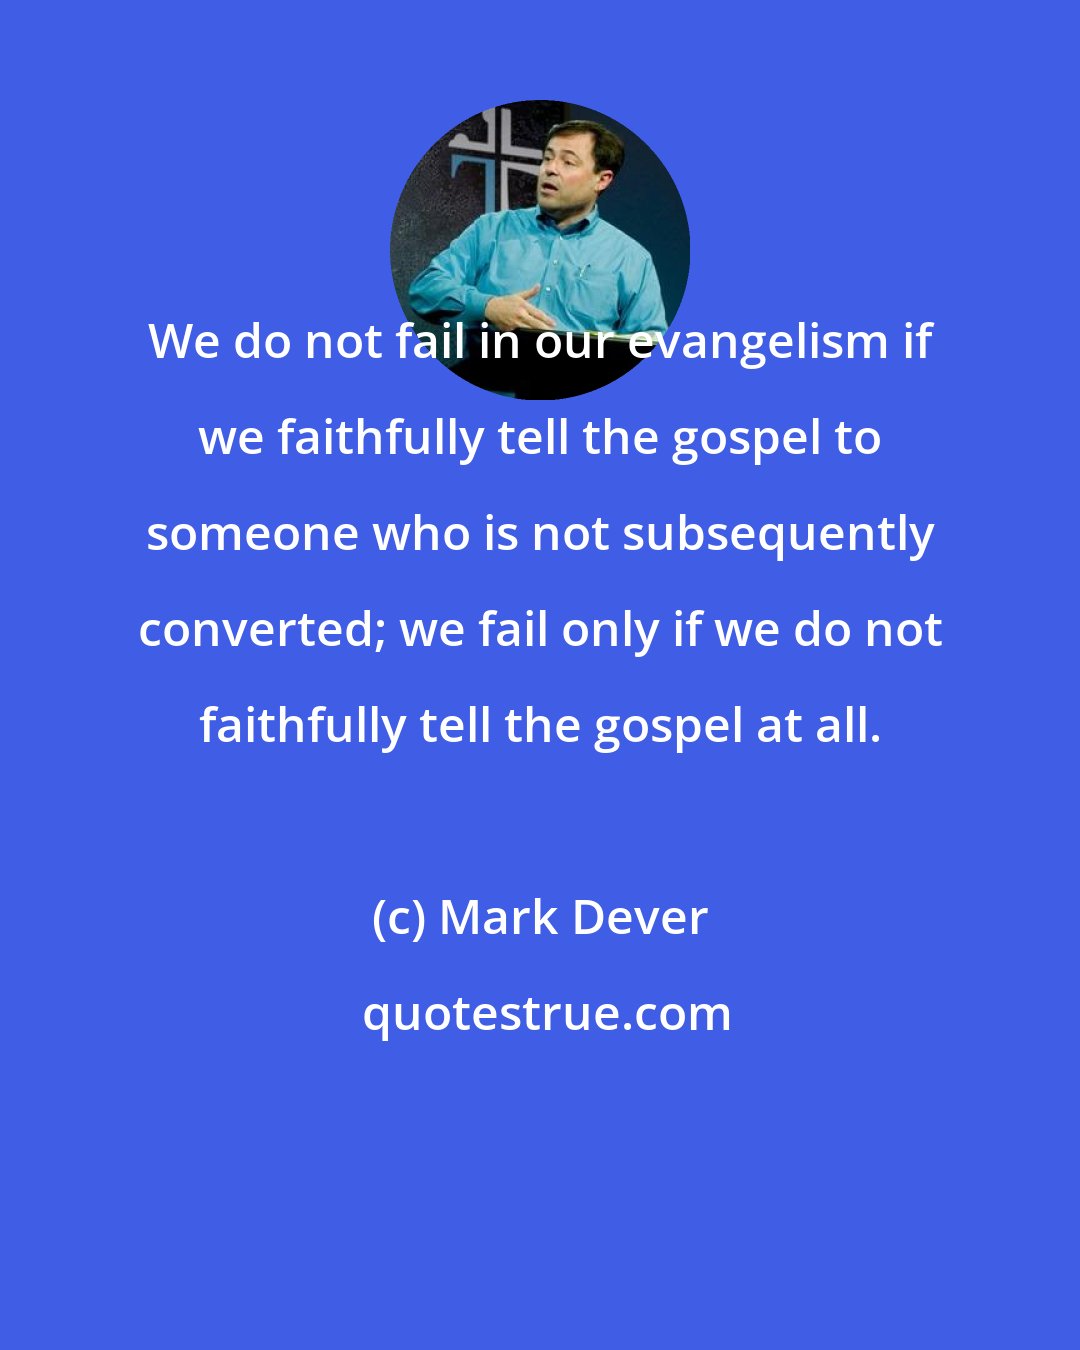 Mark Dever: We do not fail in our evangelism if we faithfully tell the gospel to someone who is not subsequently converted; we fail only if we do not faithfully tell the gospel at all.